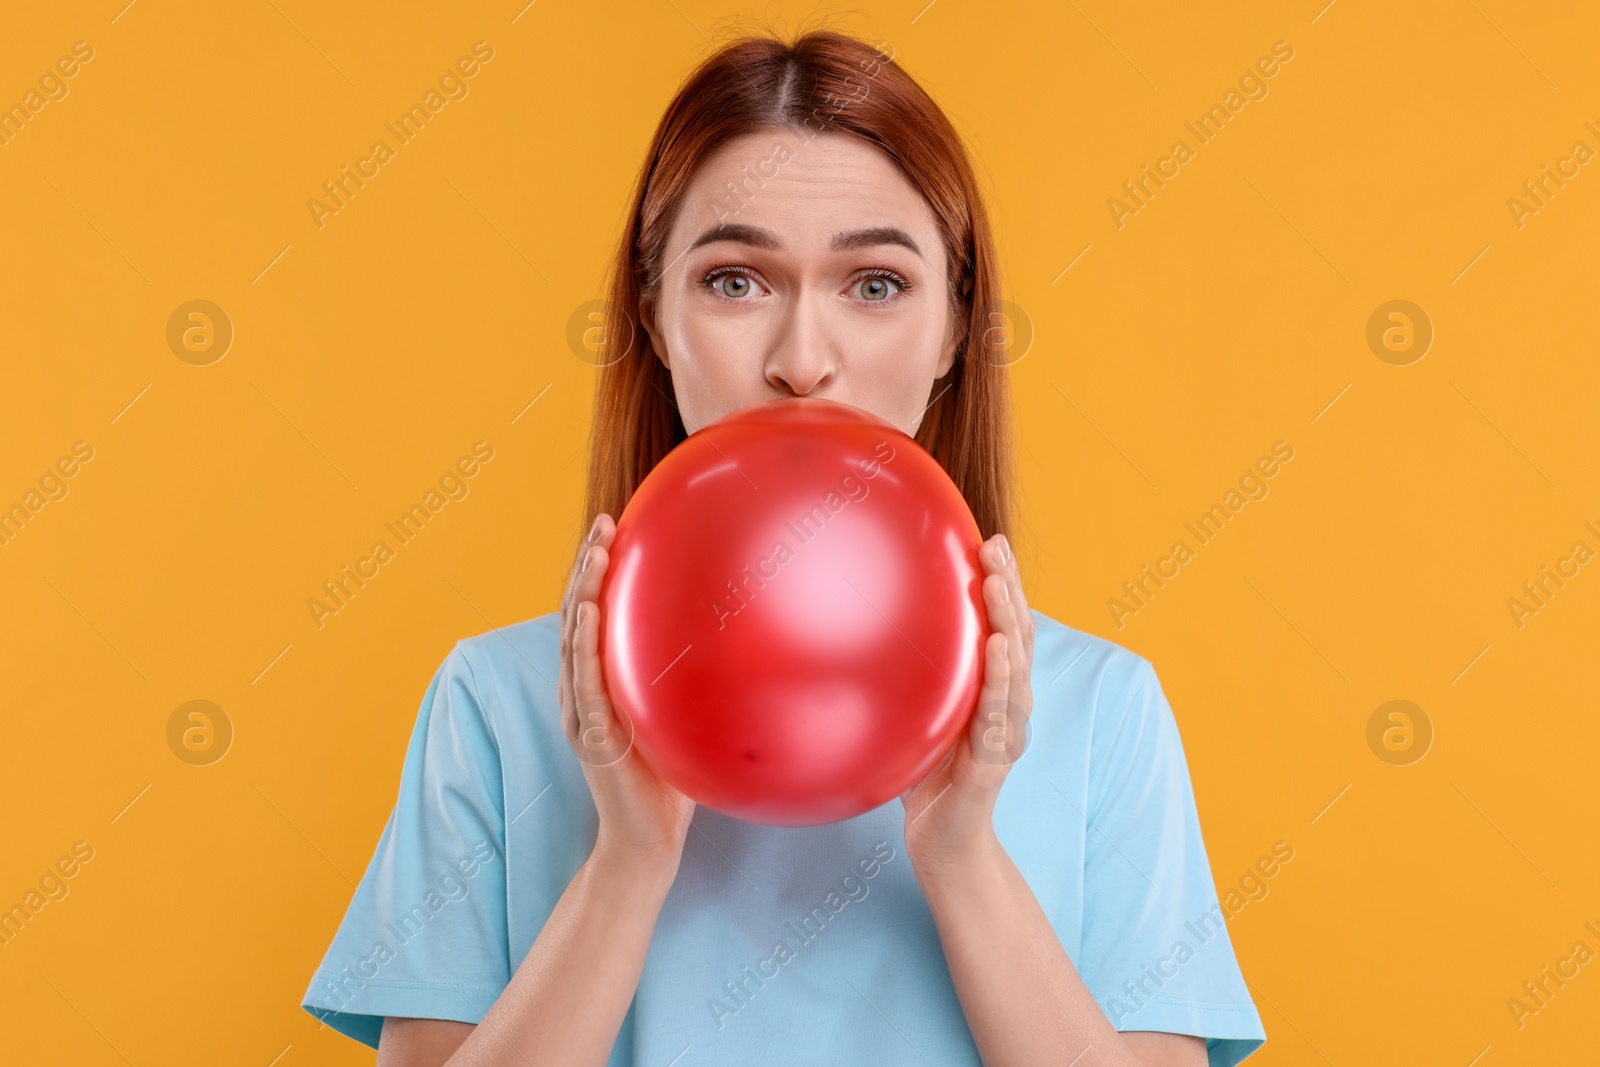 Photo of Woman inflating red balloon on orange background